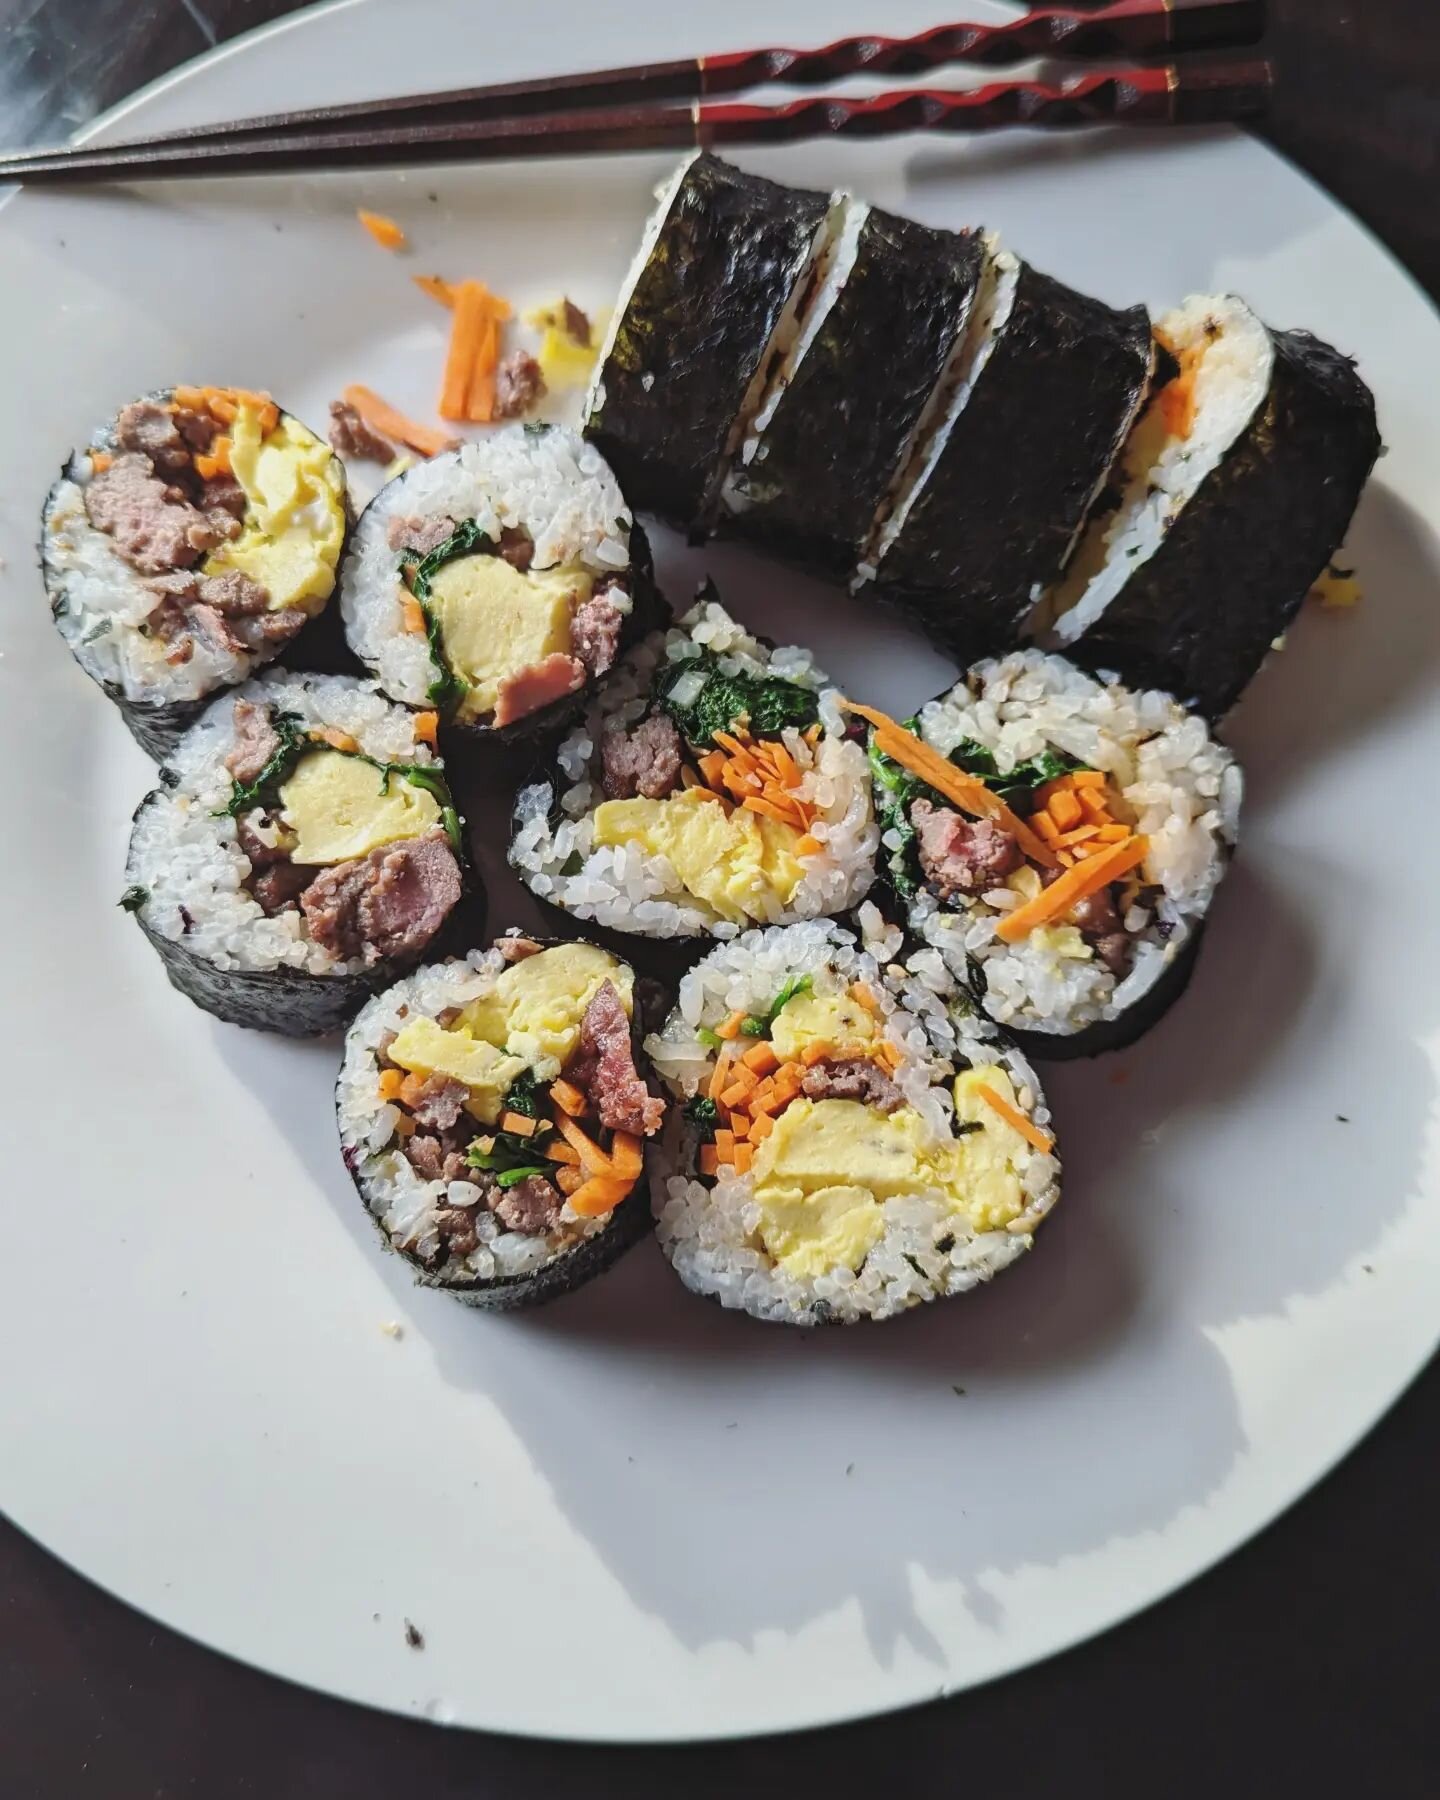 Looking for something just a bit different to make with ground beef or steak? Try kimbap/gimbap (Korean &quot;sushi&quot; rolls)! 

You can customize however you want! We like using nori, rice, eggs, ground beef or steak, and veggies like carrot, pic